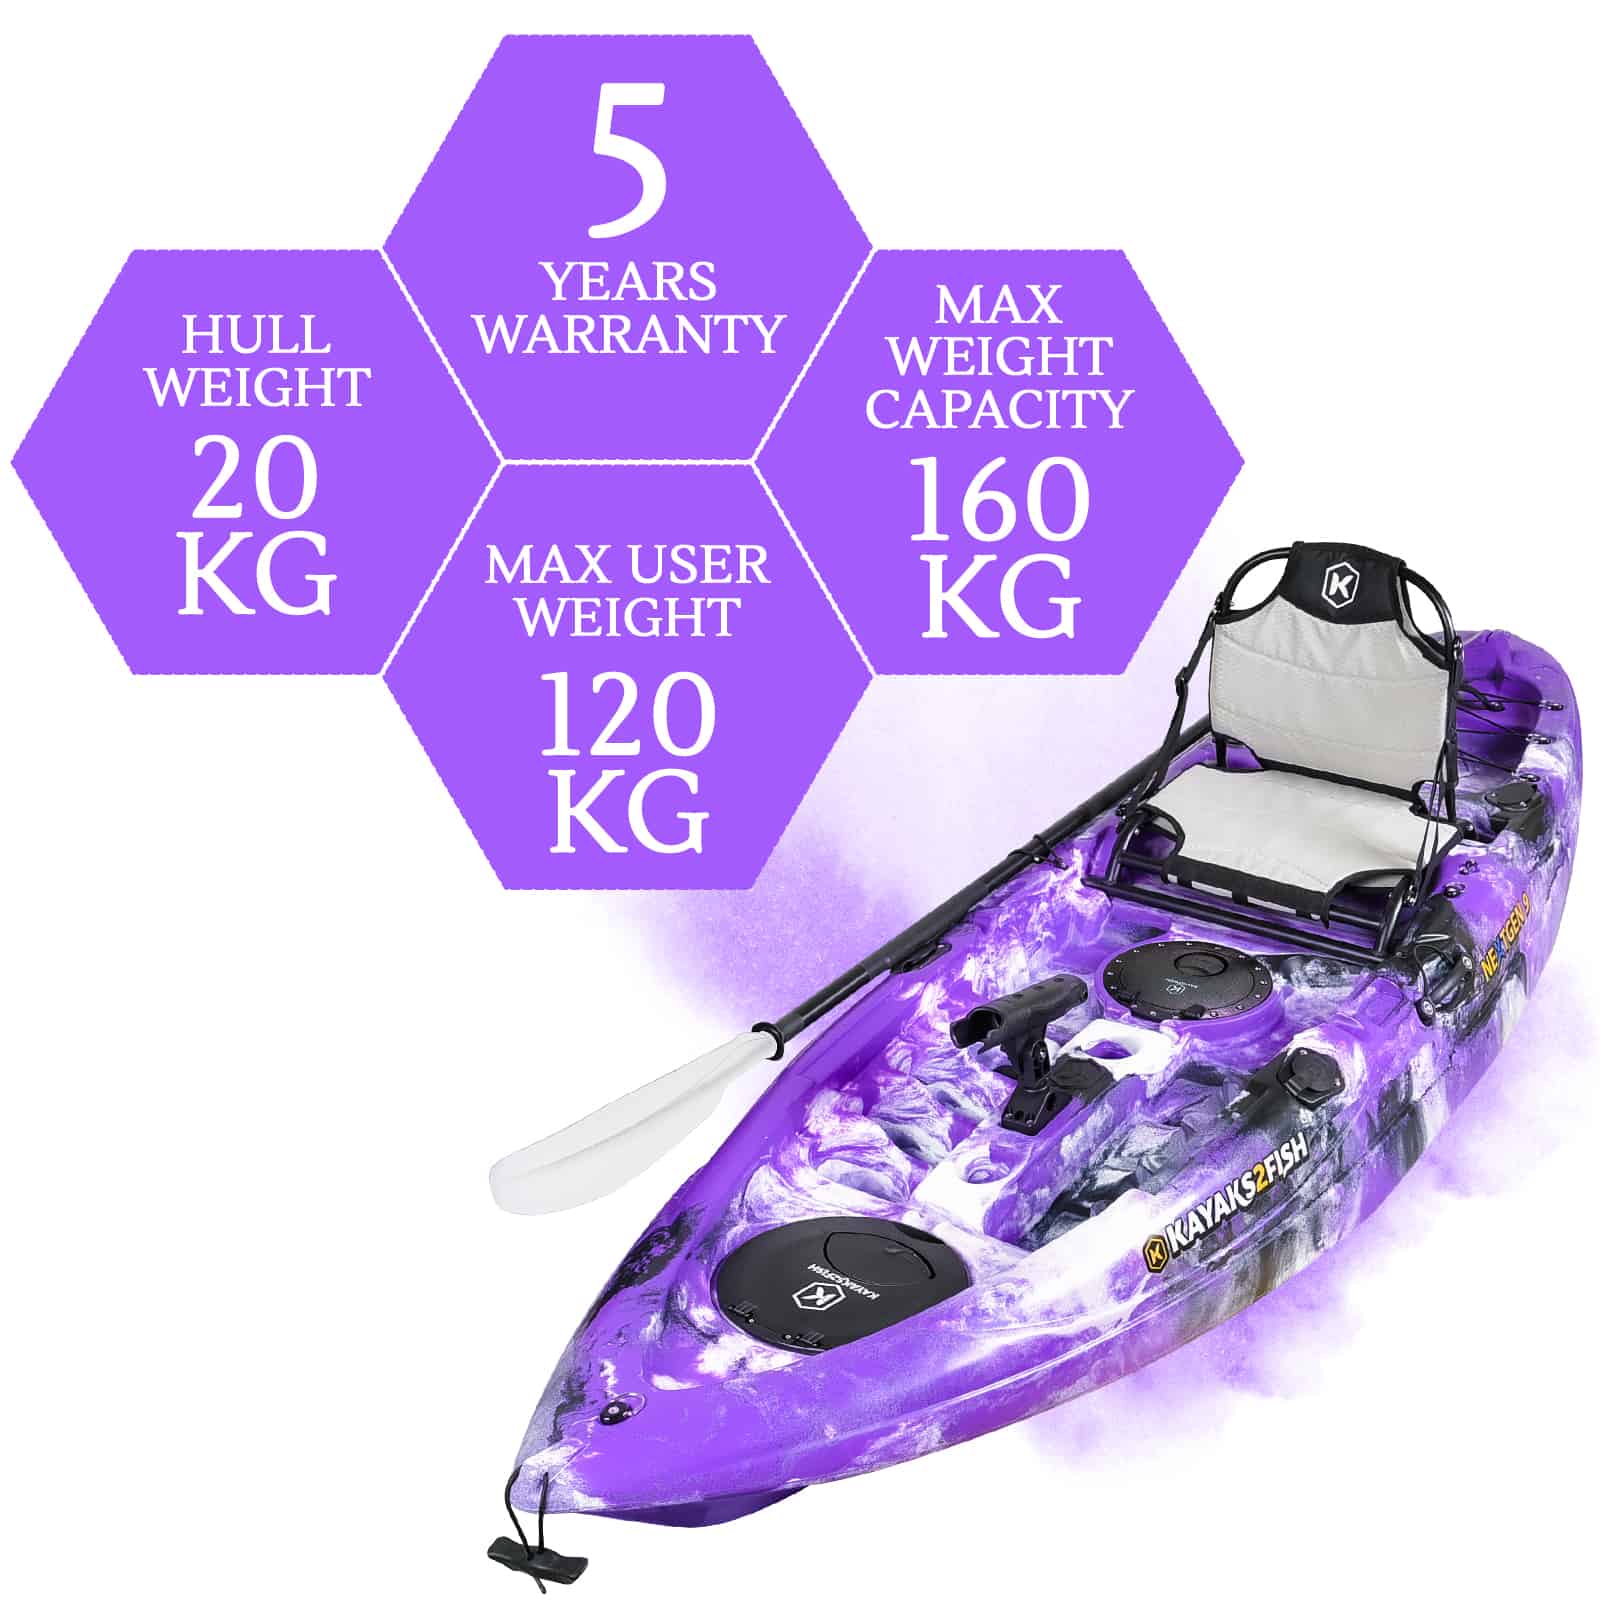 NGB-09-PURPLECAMO specifications